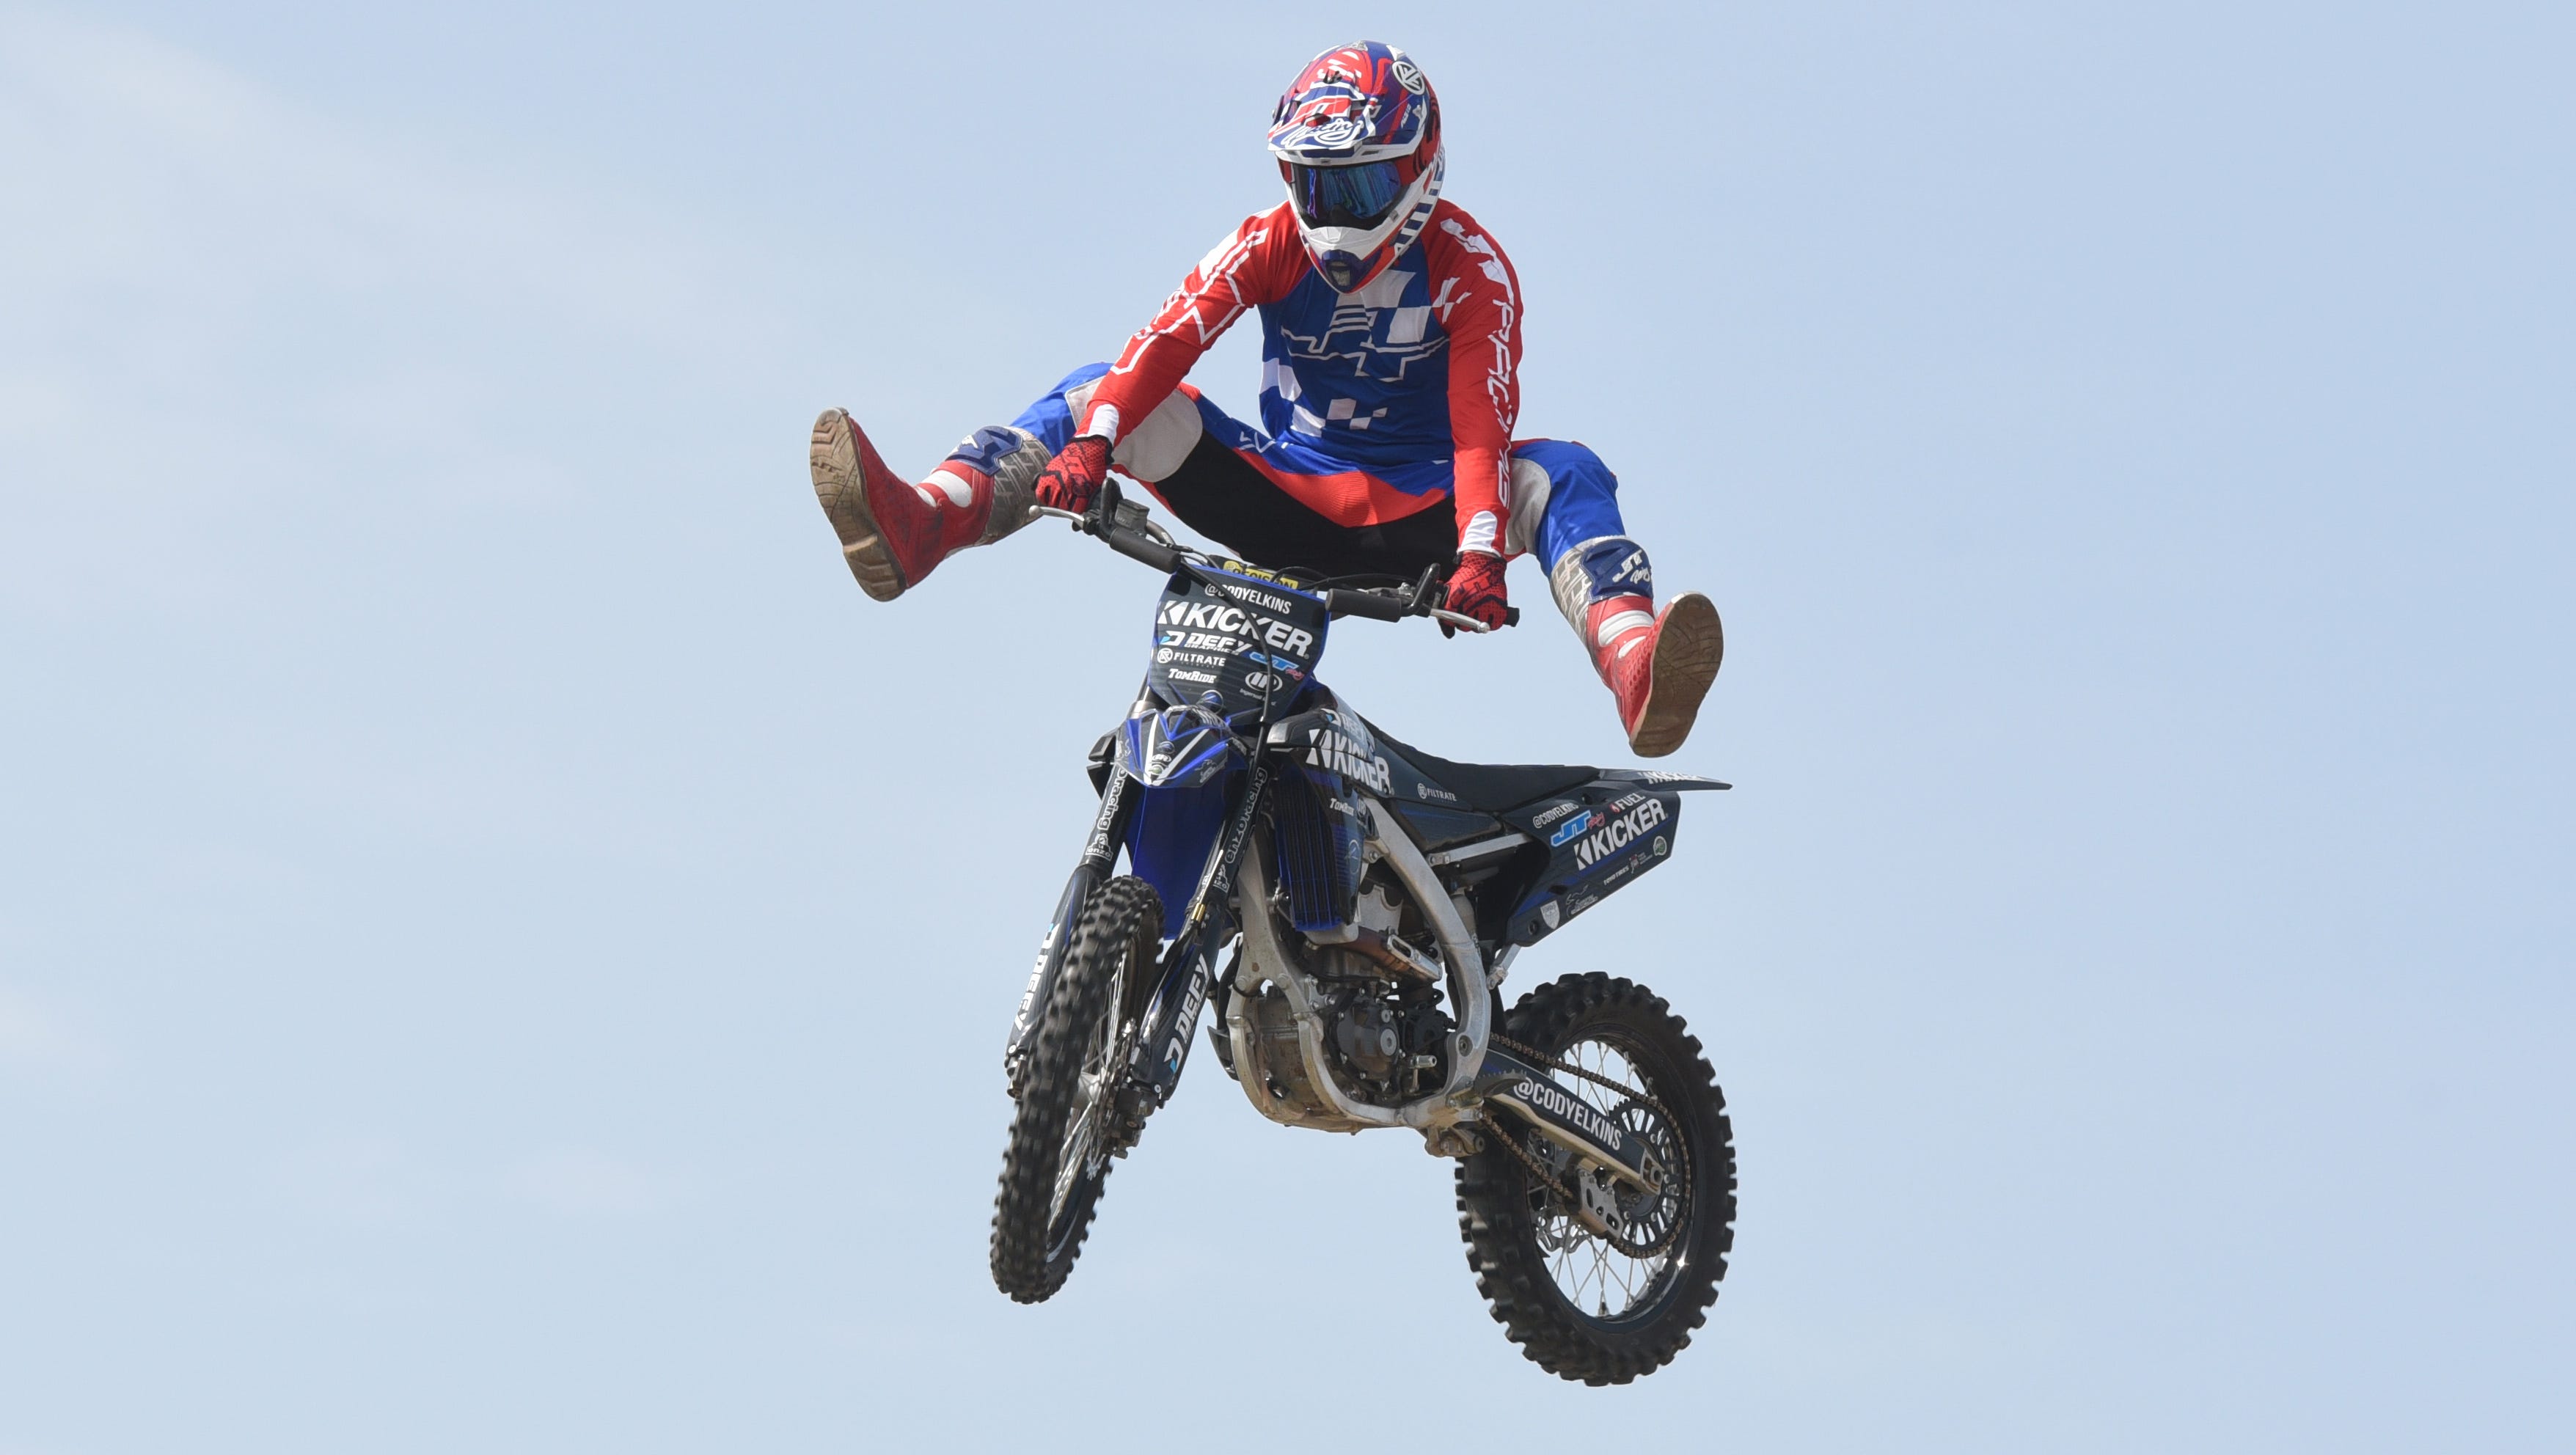 A professional motocross rider kicks his heels up for the crowd during the Roadkill Nights event held at M1 Concourse in Pontiac on Saturday, August 11, 2018.